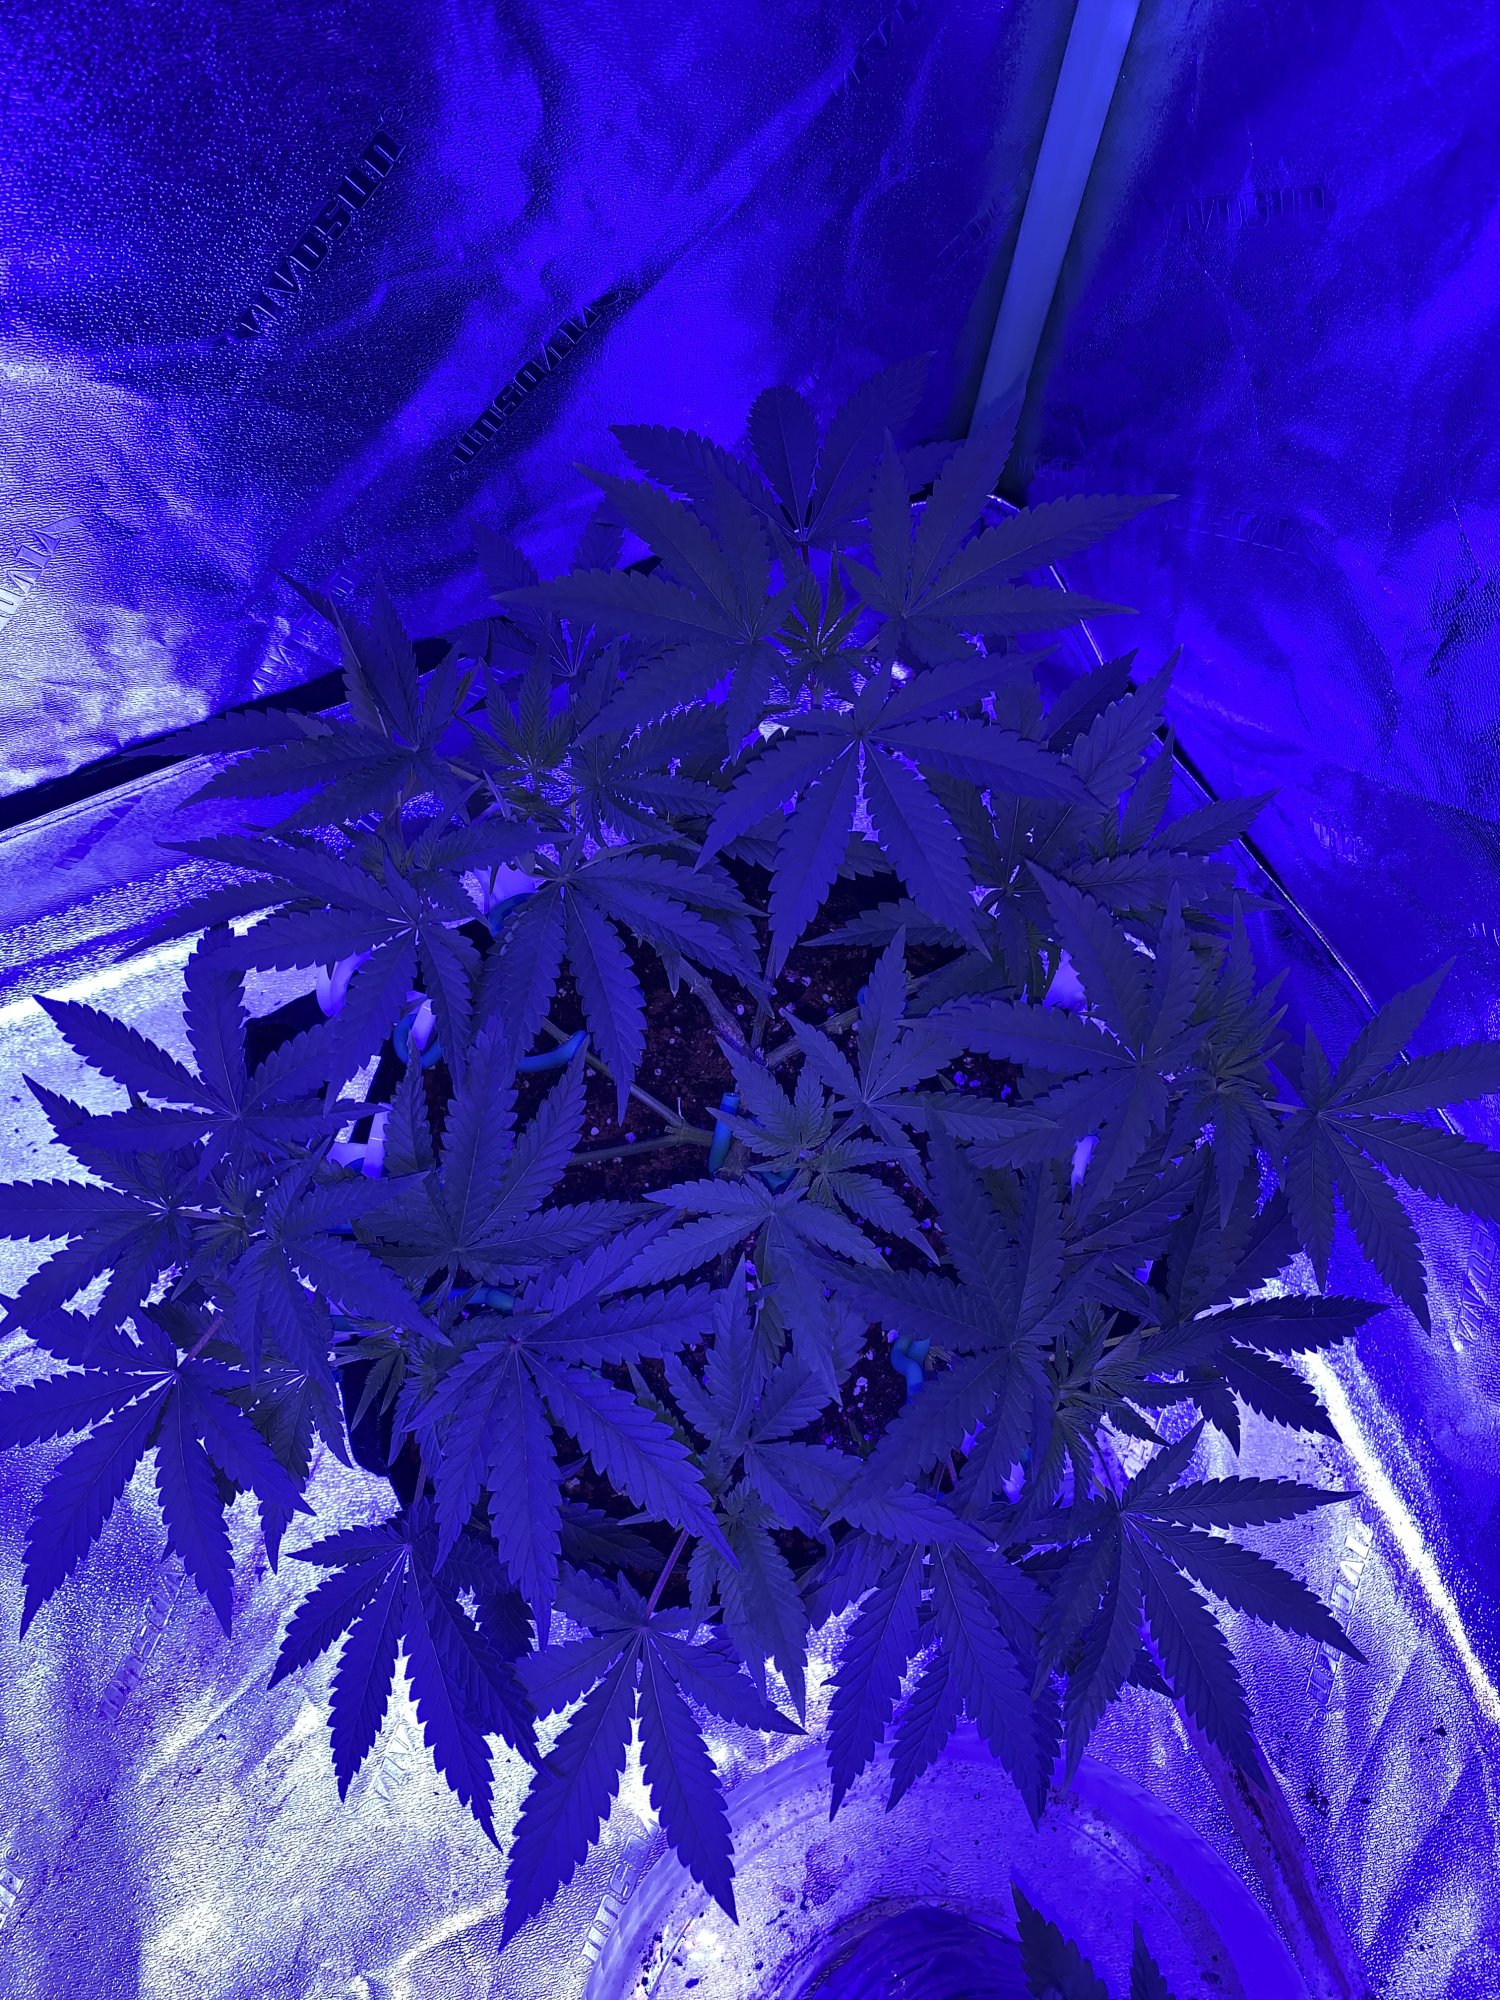 Are these too early to flip into flower 2